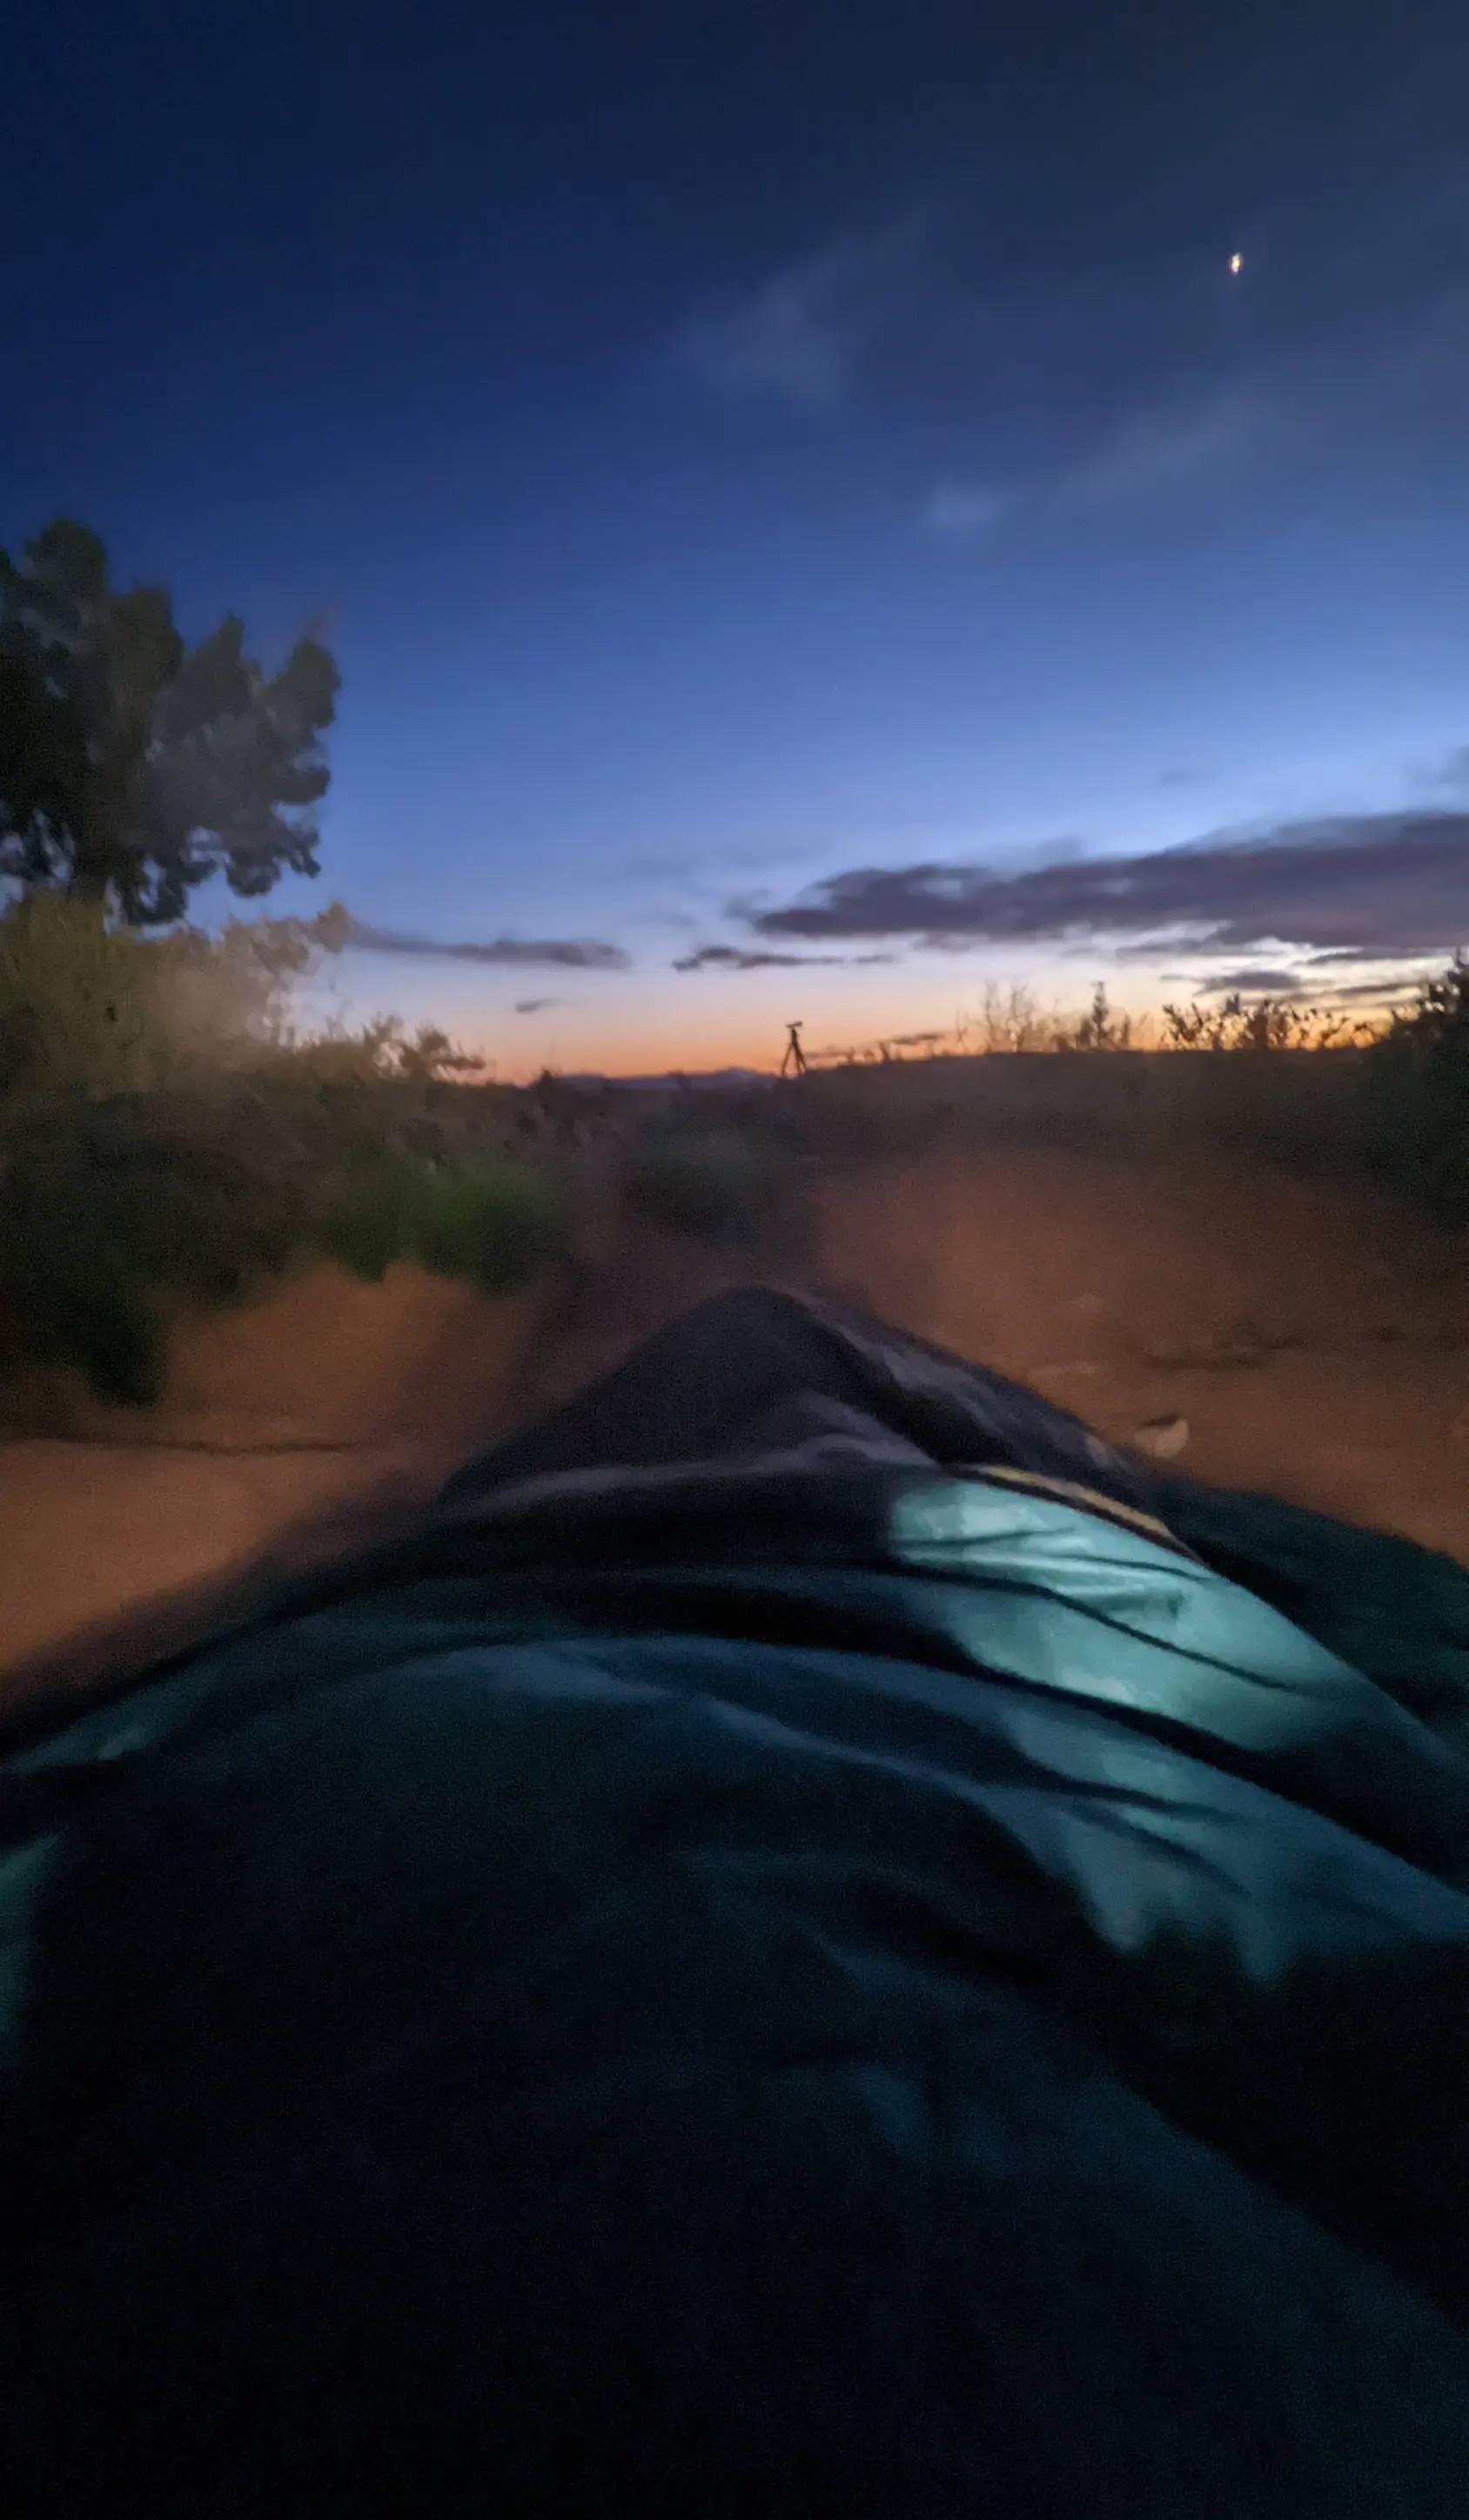 Sleeping bag picture with night sky